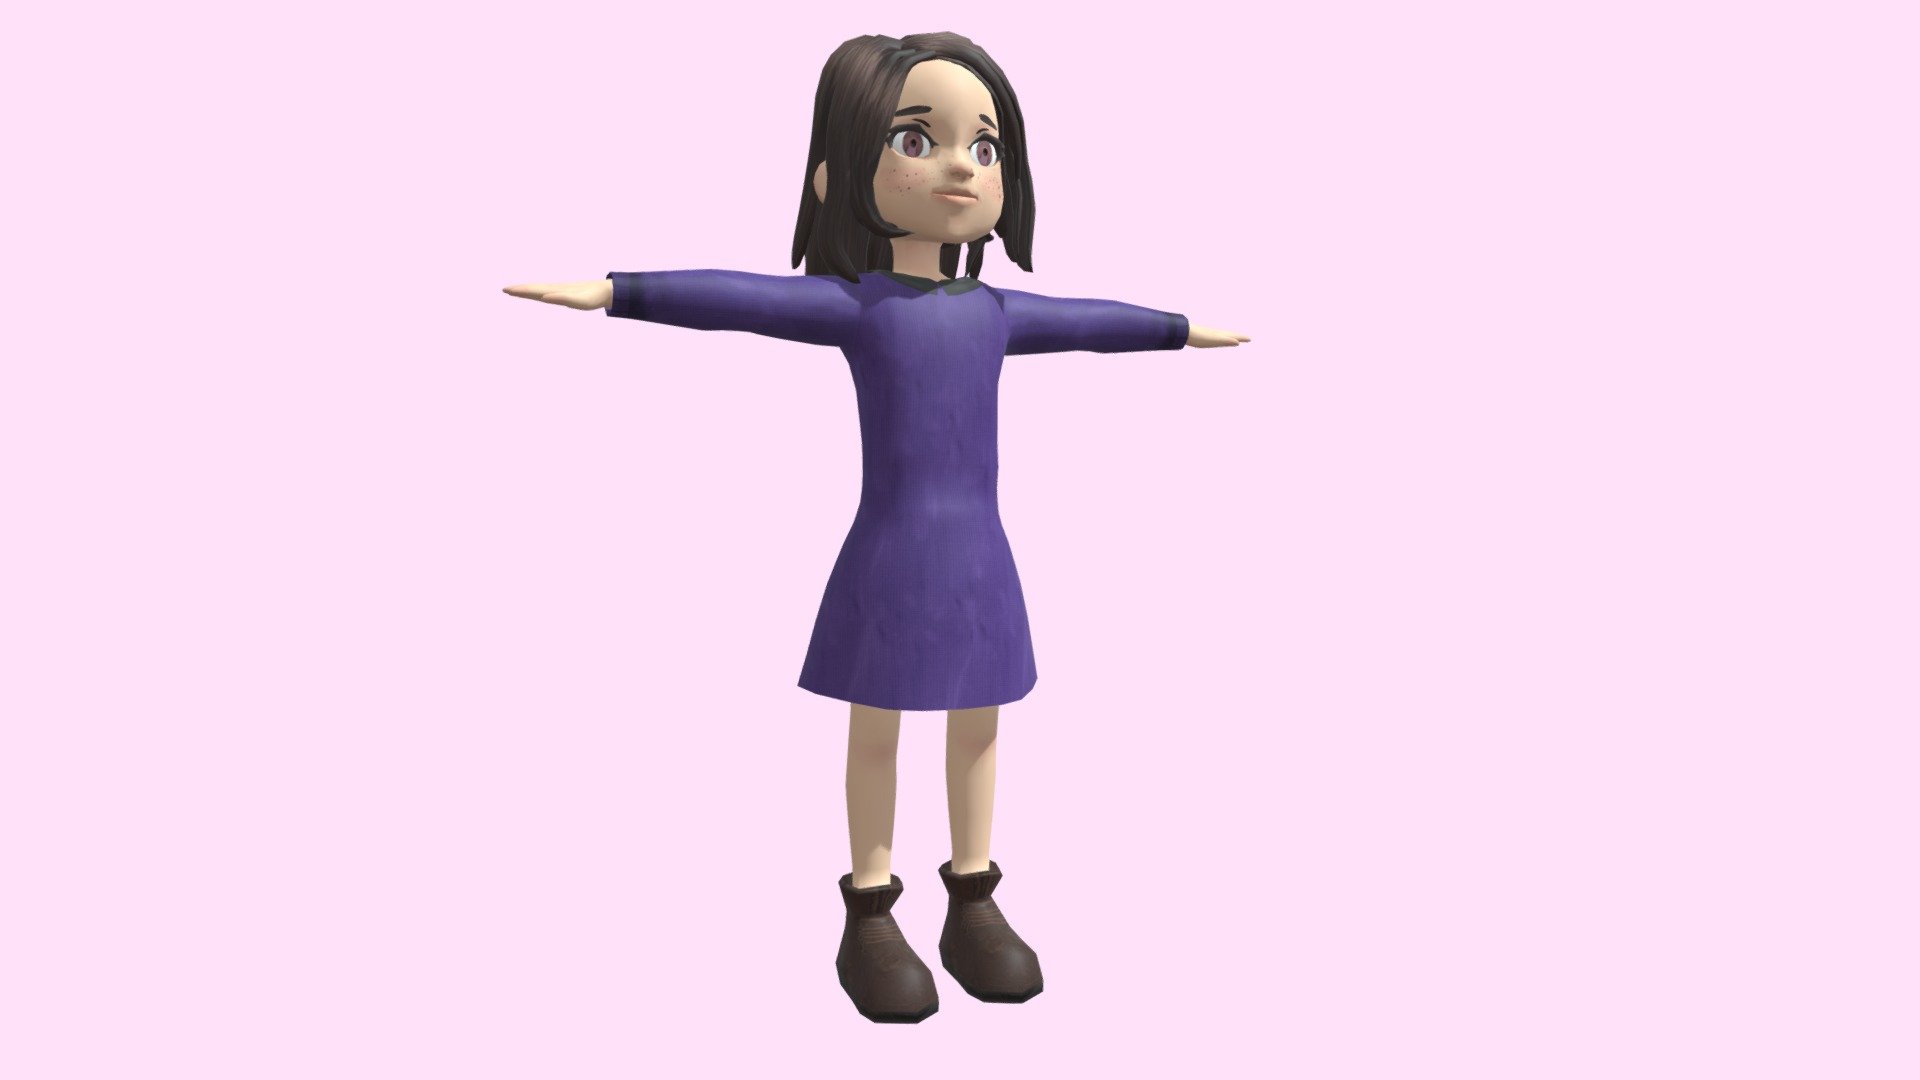 I'm going to use this character for a future proyect, so let me know what you think - Little girl in a purple dress - 3D model by AxeelSM 3d model